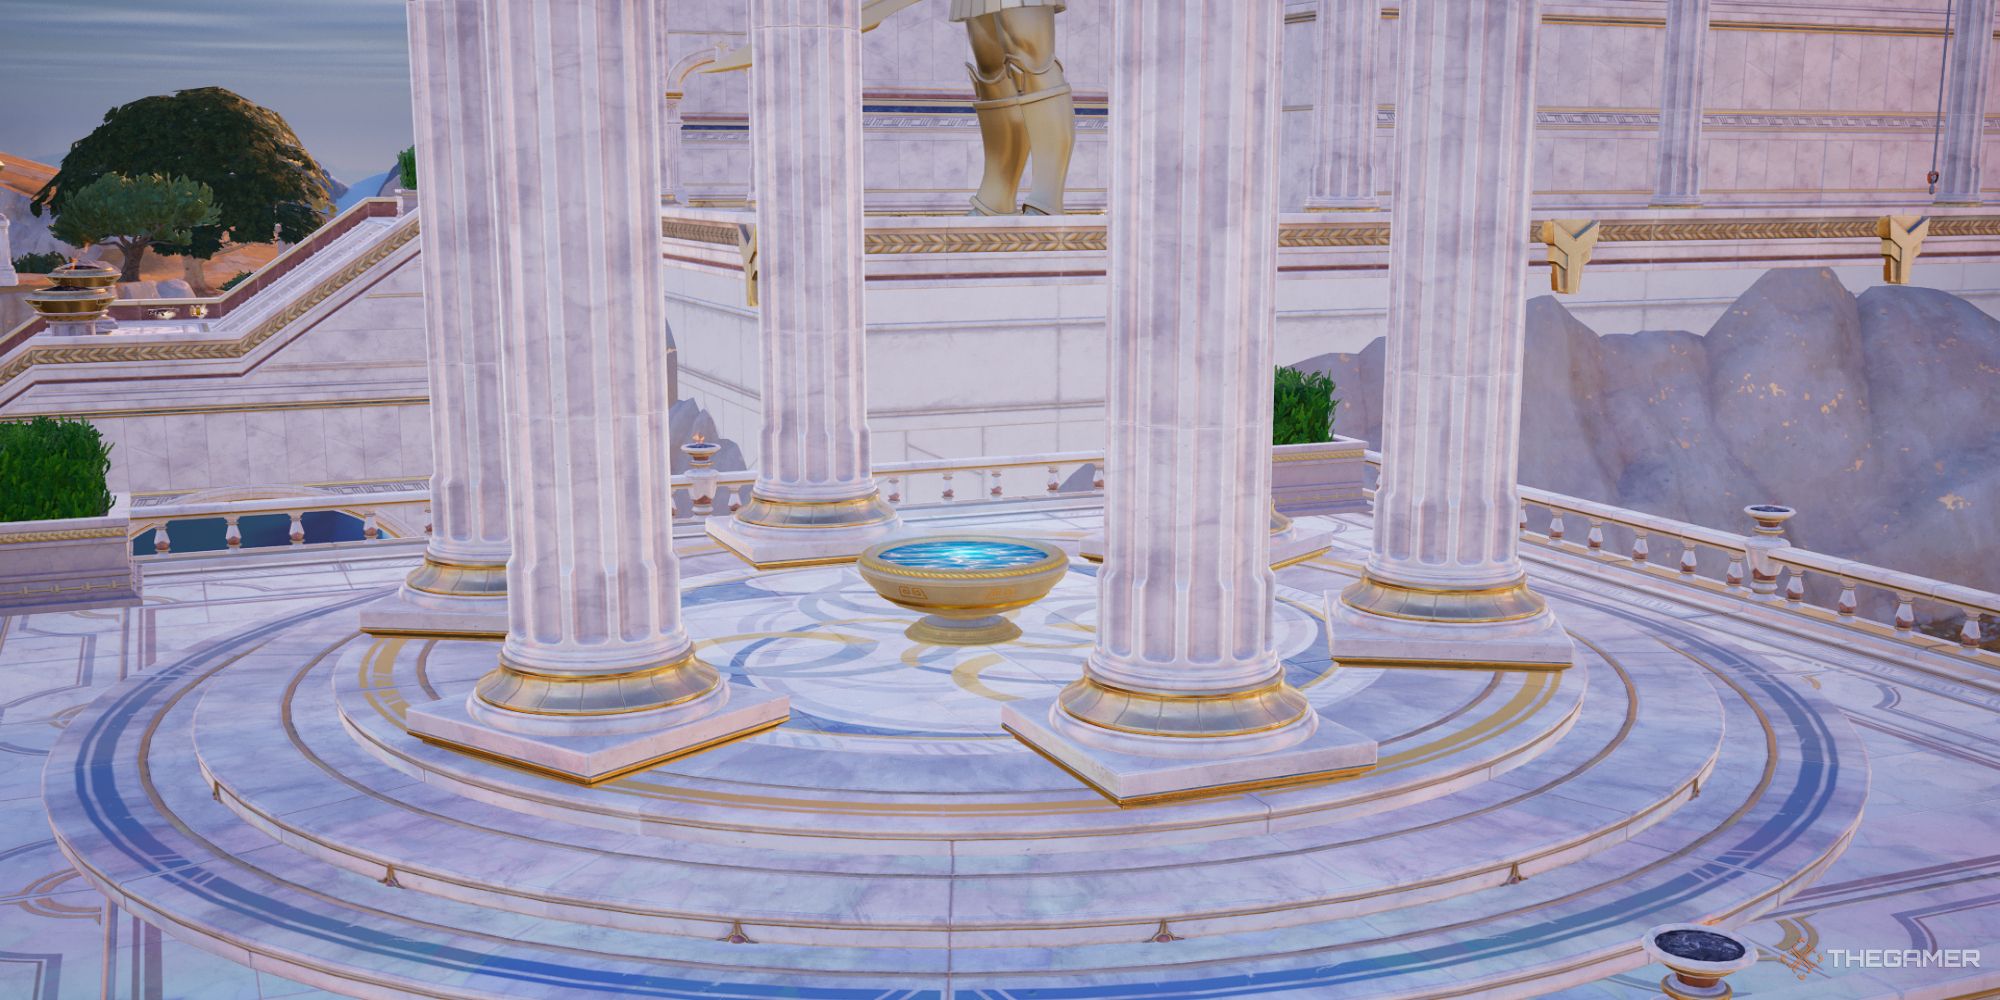 A screenshot from Fortnite Chapter Five Season Two showing the Scrying Pool at Mount Olympus surrounded by marble columns with a bronze statue and marble structure visible in the distance.